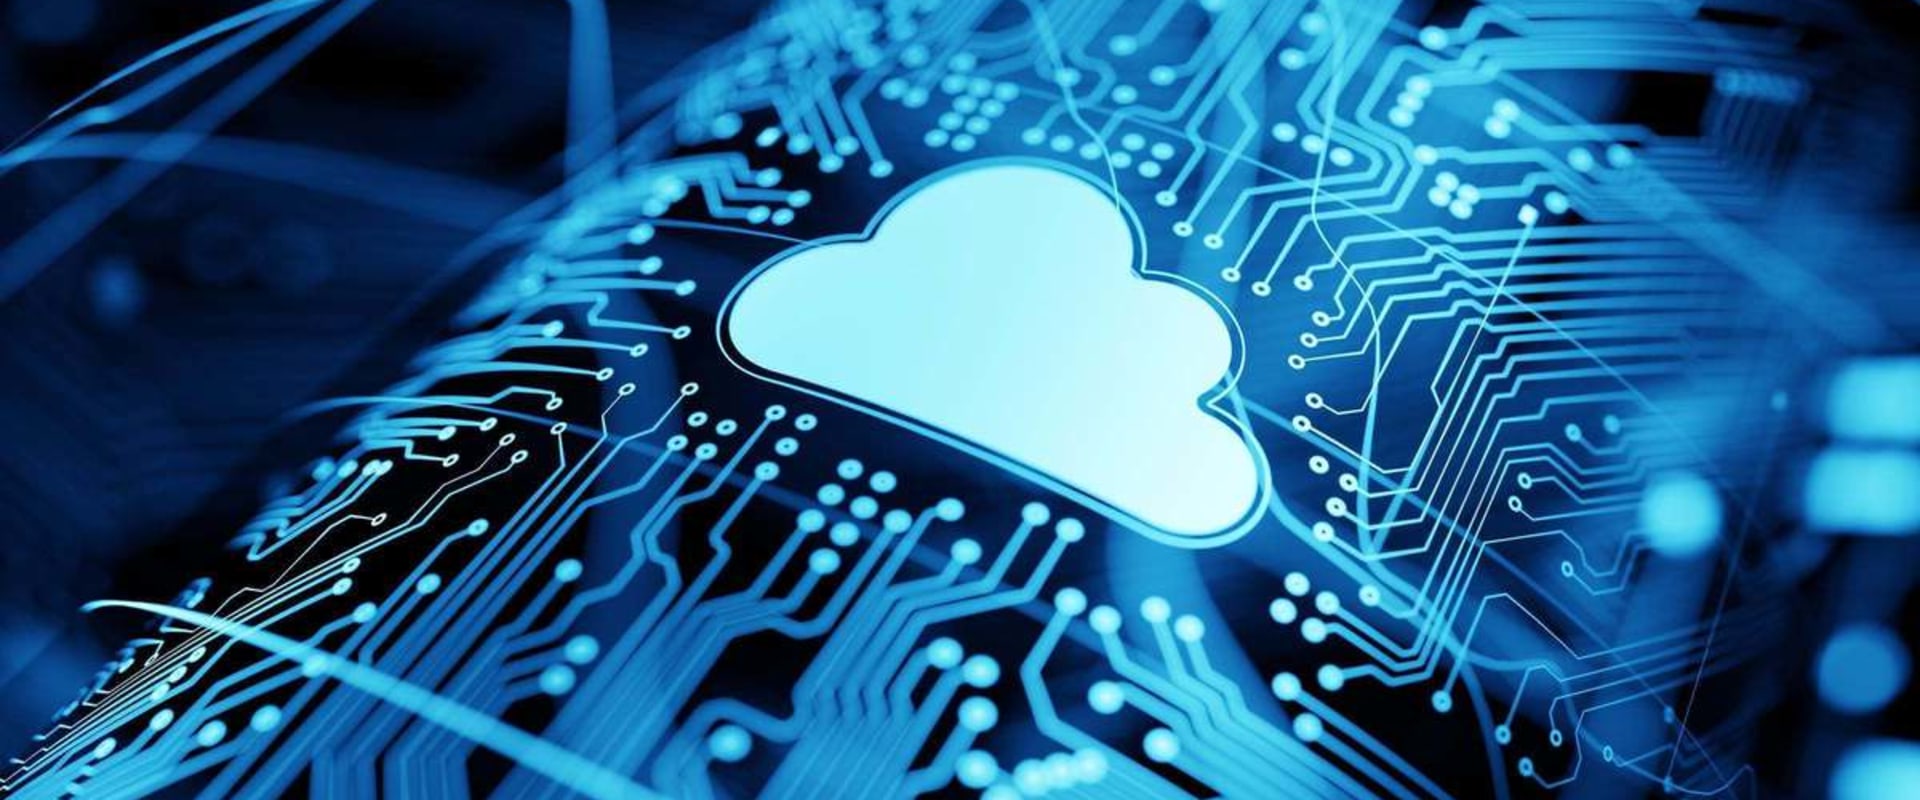 Cloud Computing Services: What You Need to Know